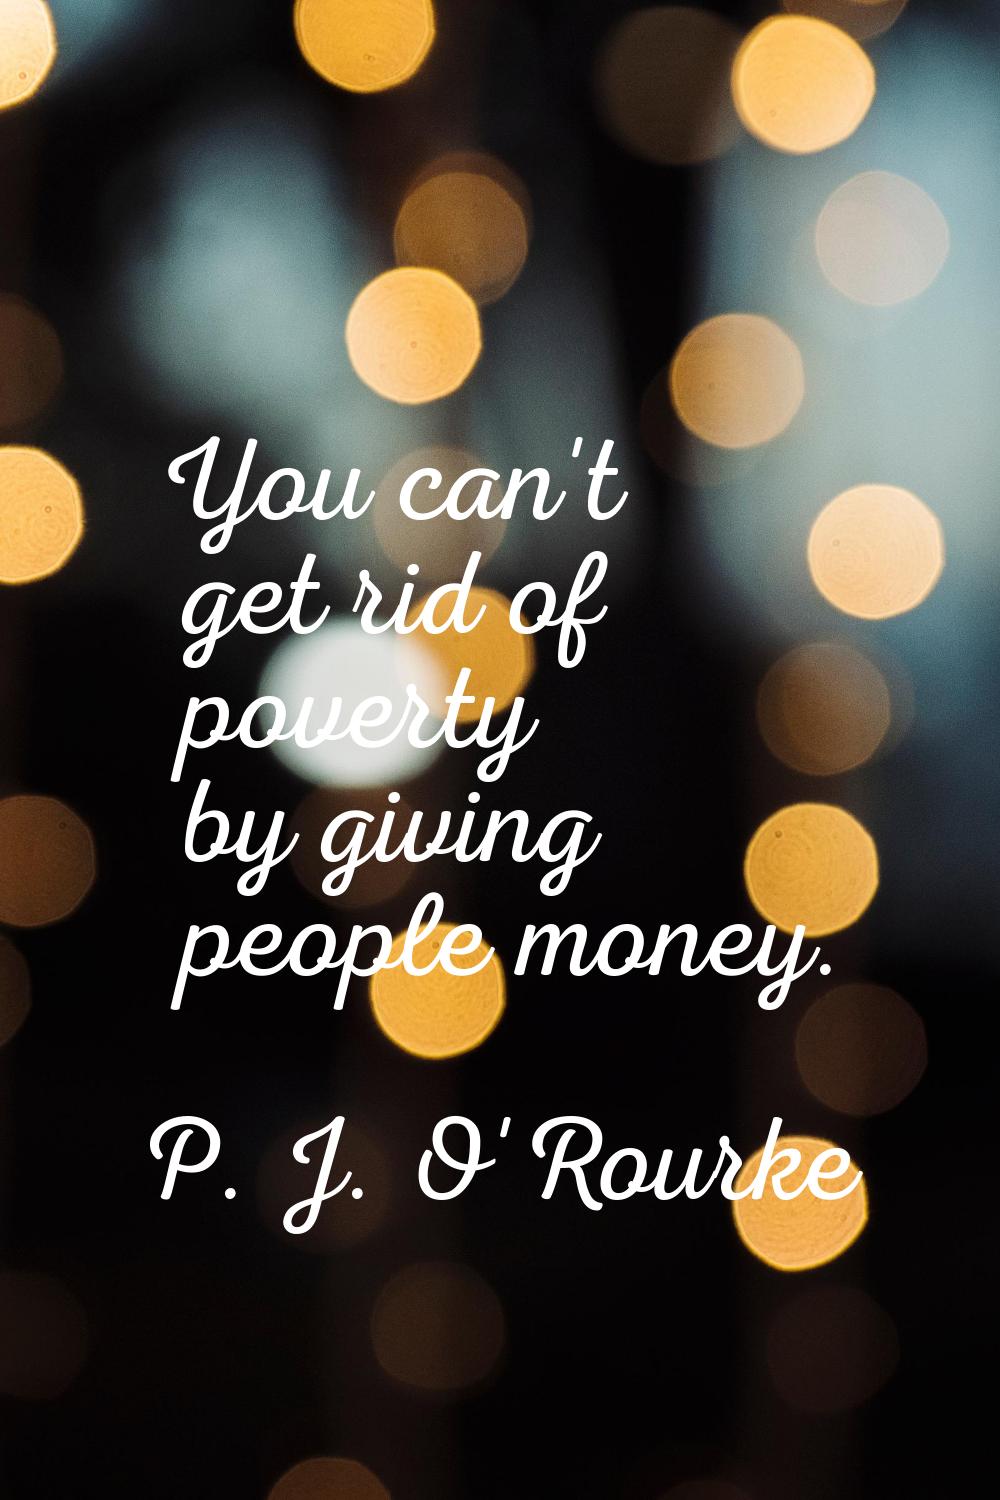 You can't get rid of poverty by giving people money.